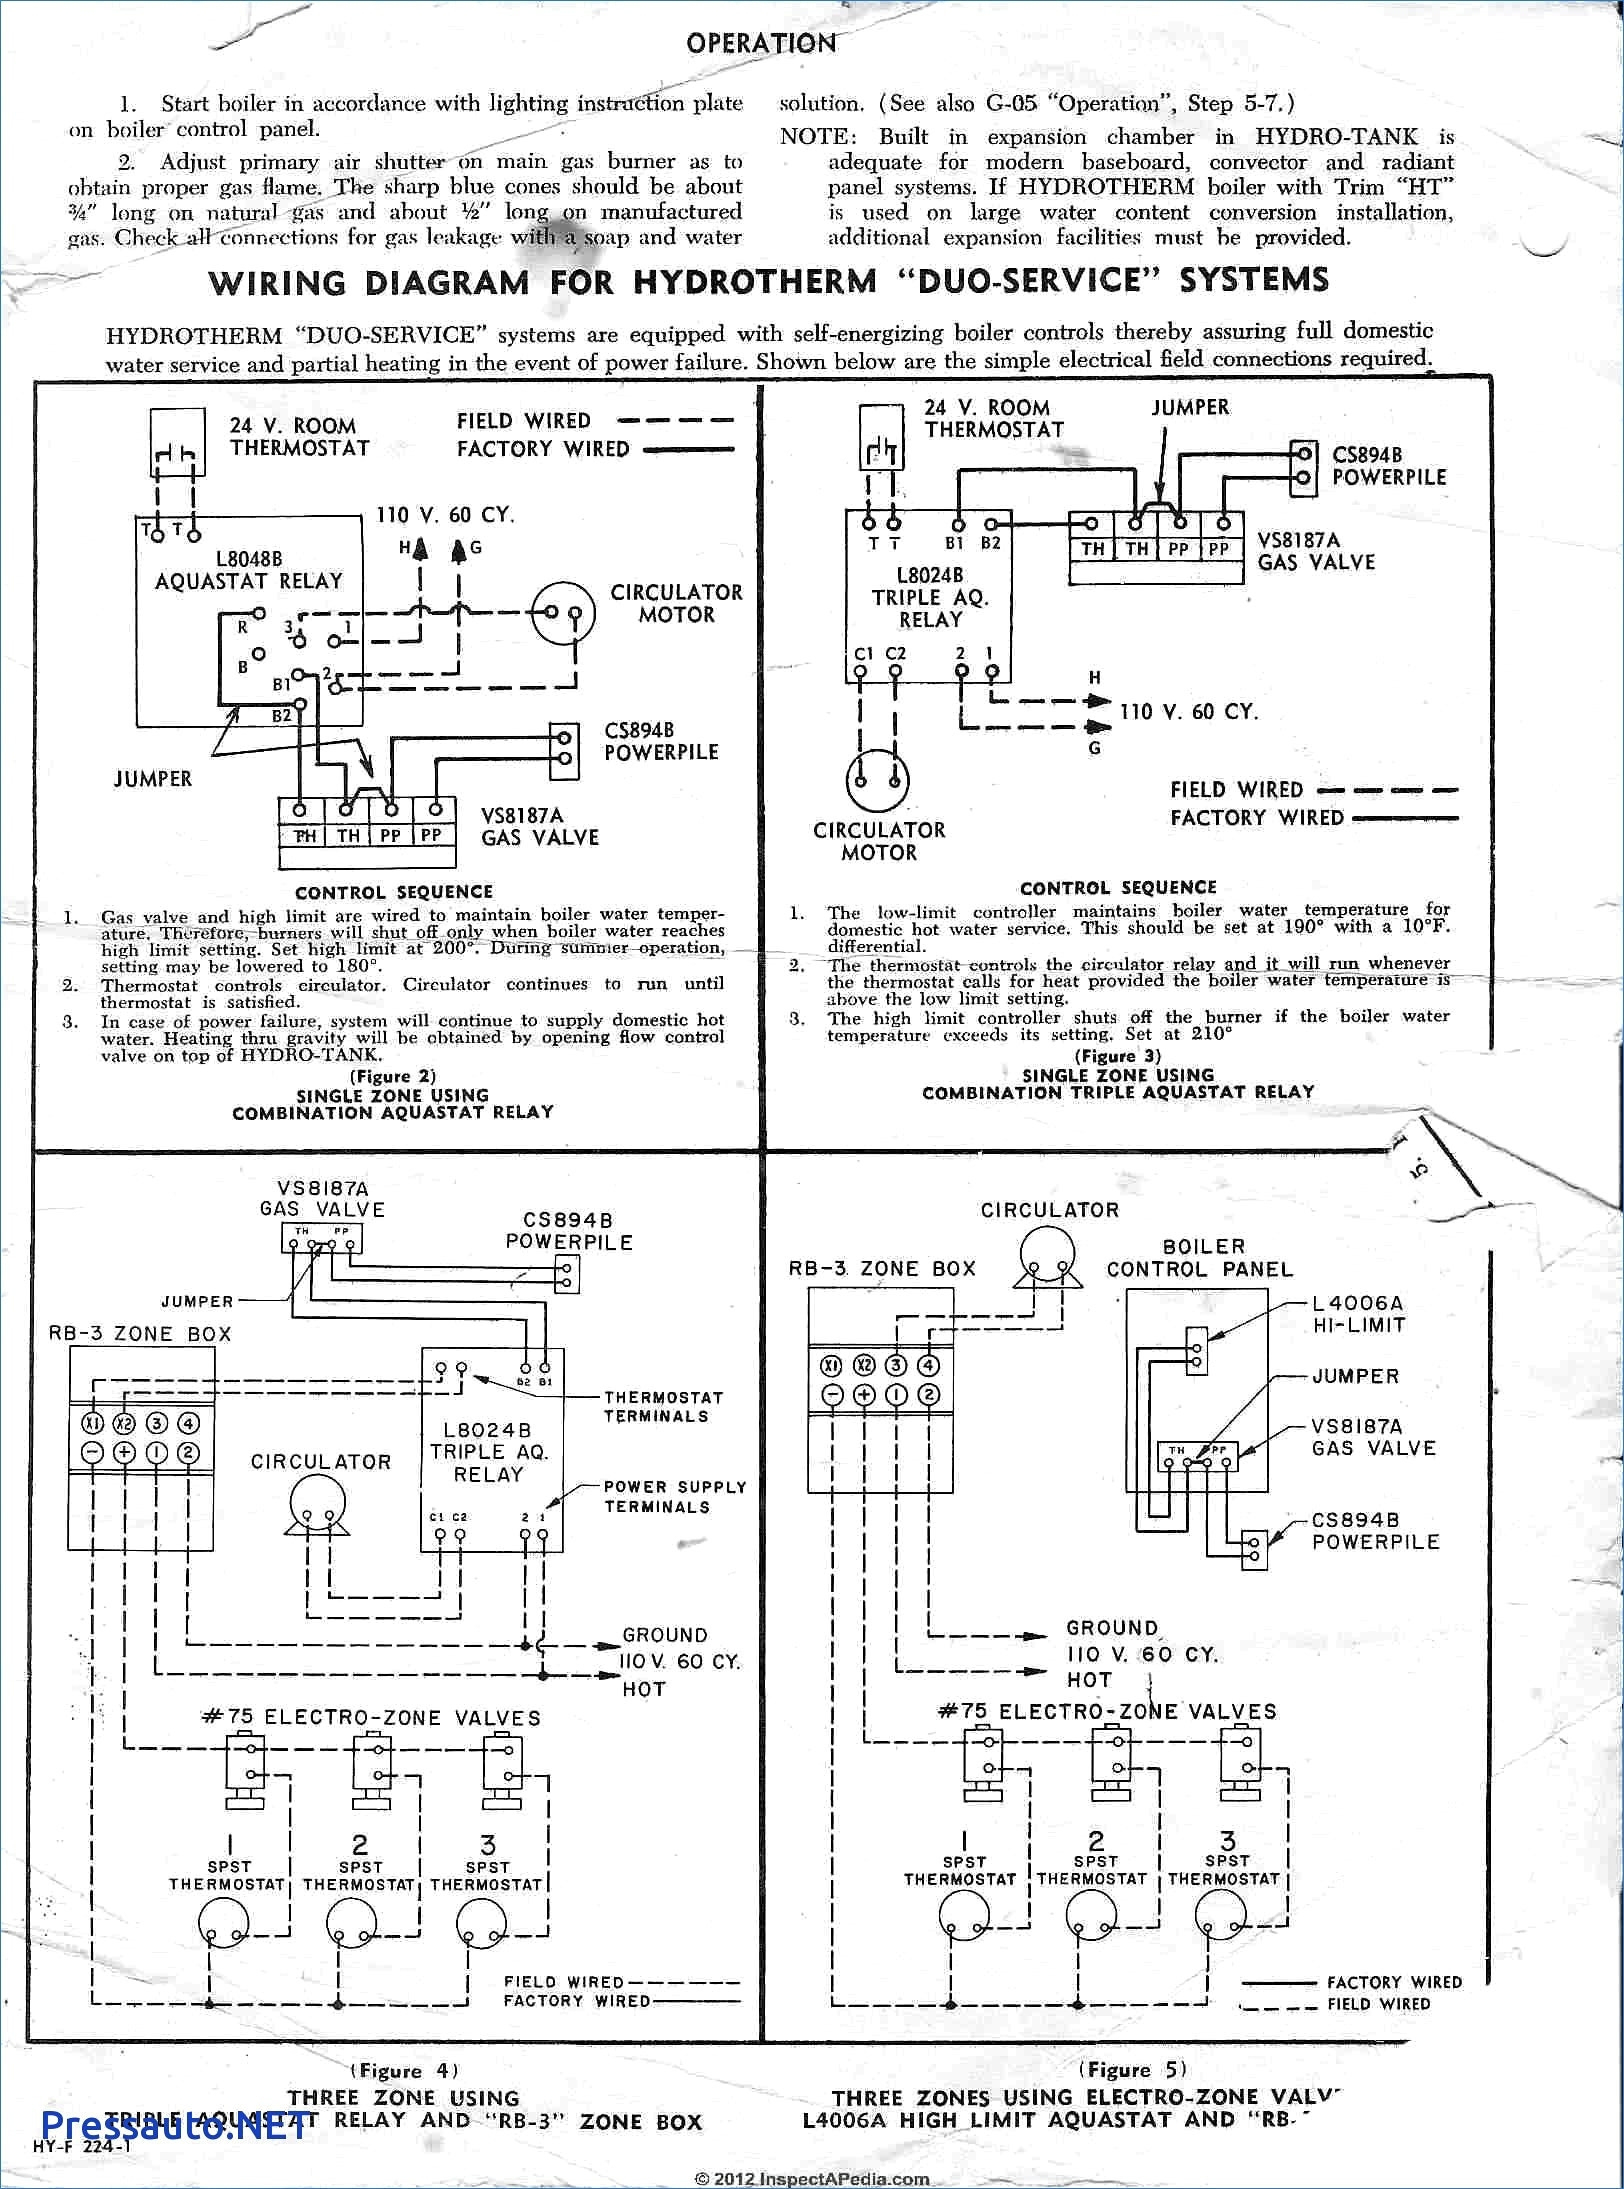 White Rodgers Gas Valve Wiring Diagram - All Wiring Diagram - White Rogers Thermostat Wiring Diagram